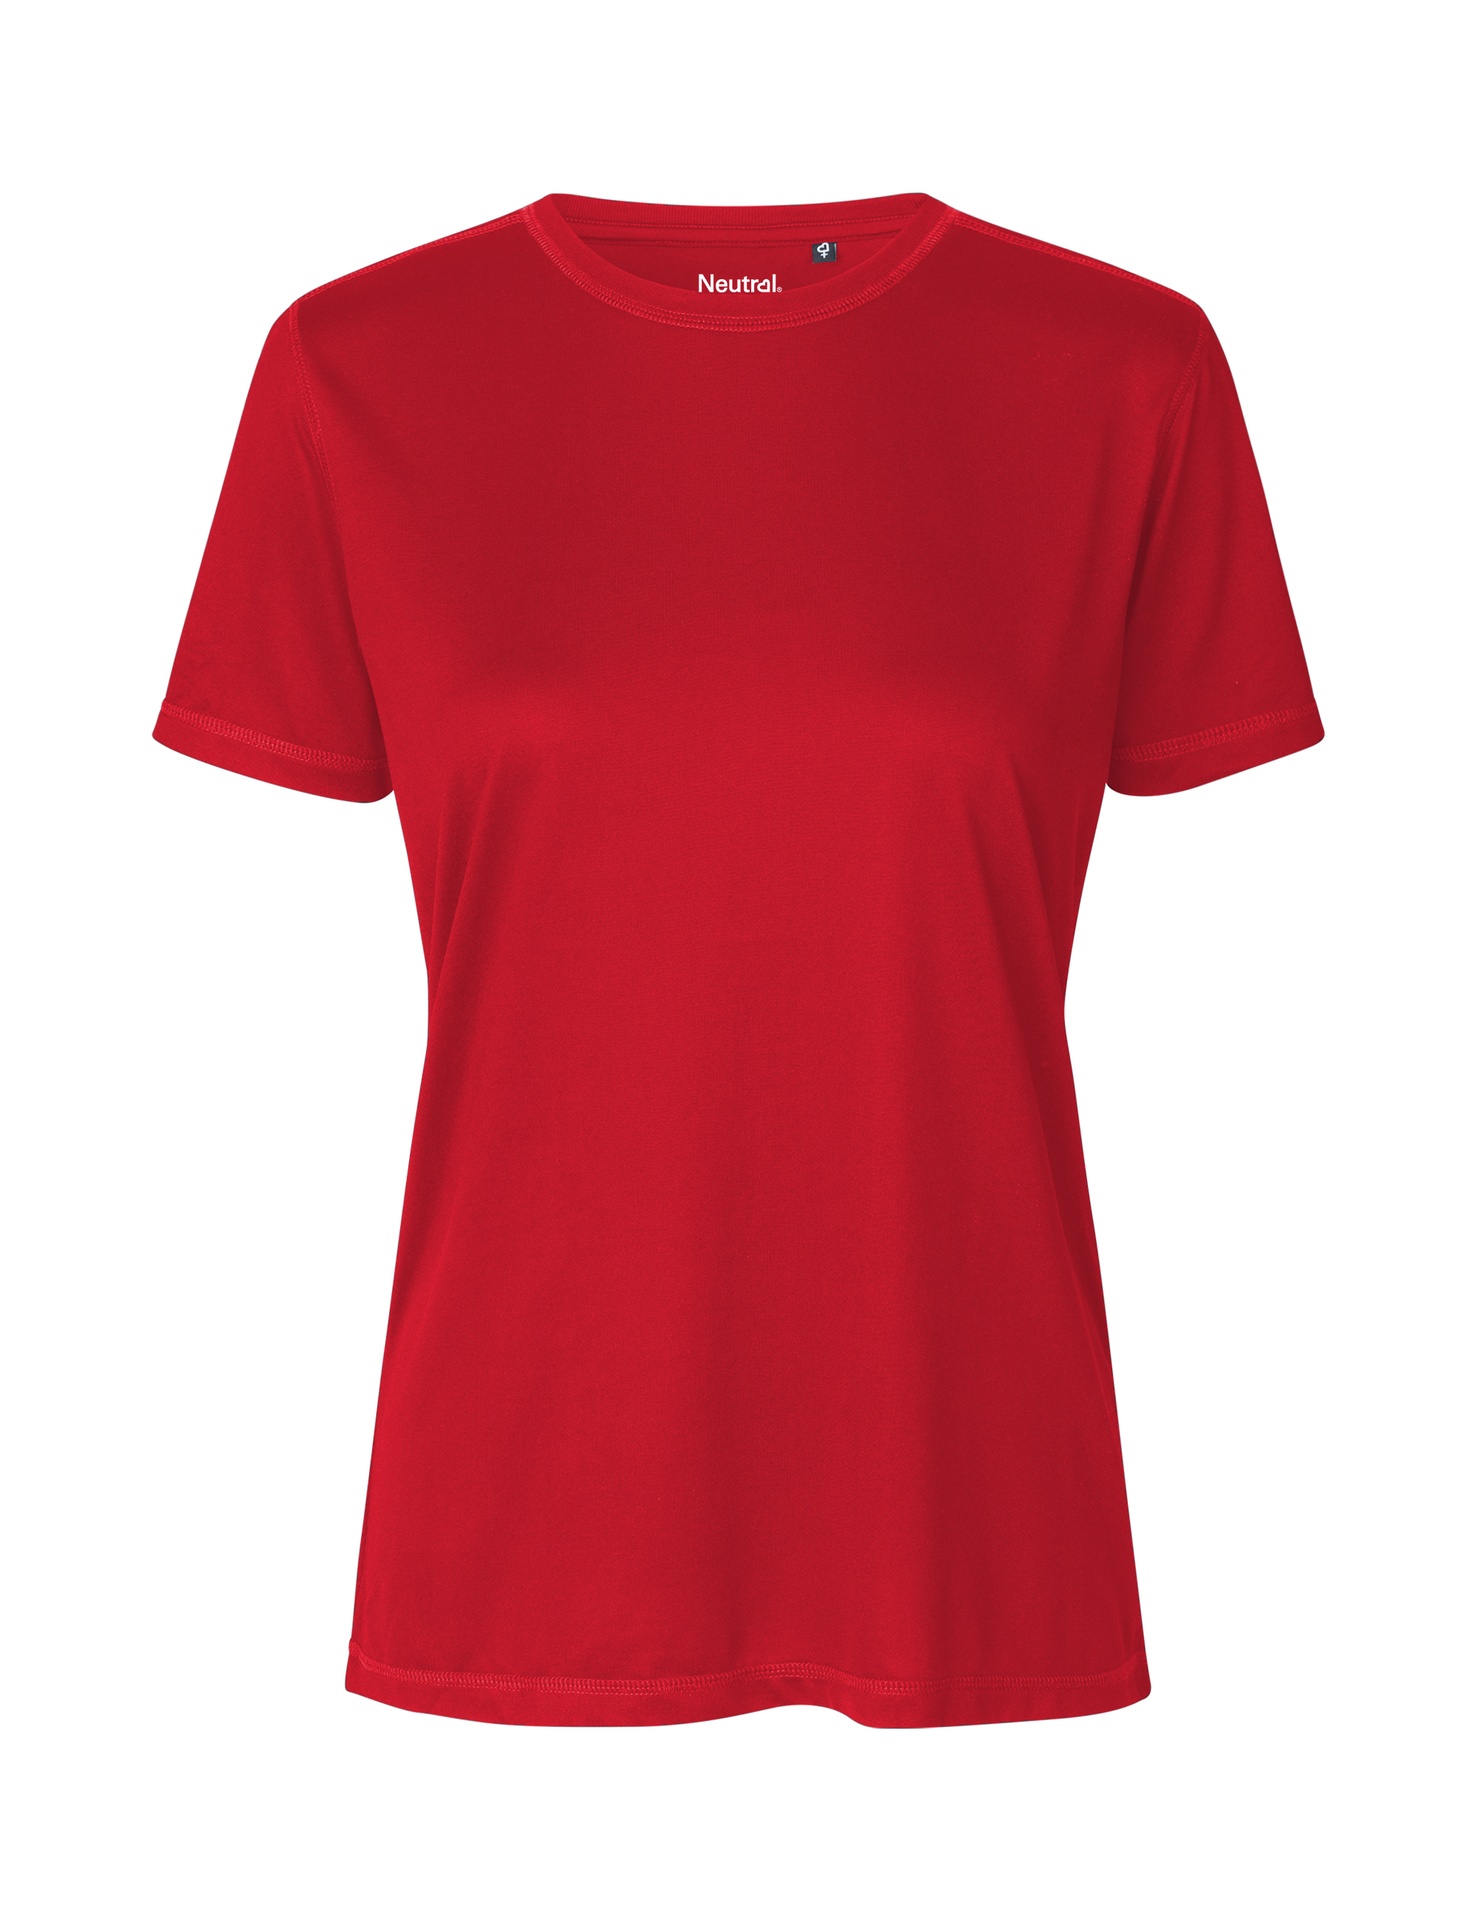 [PR/05213] Ladies Recycled Performance T-Shirt (Red 05, L)